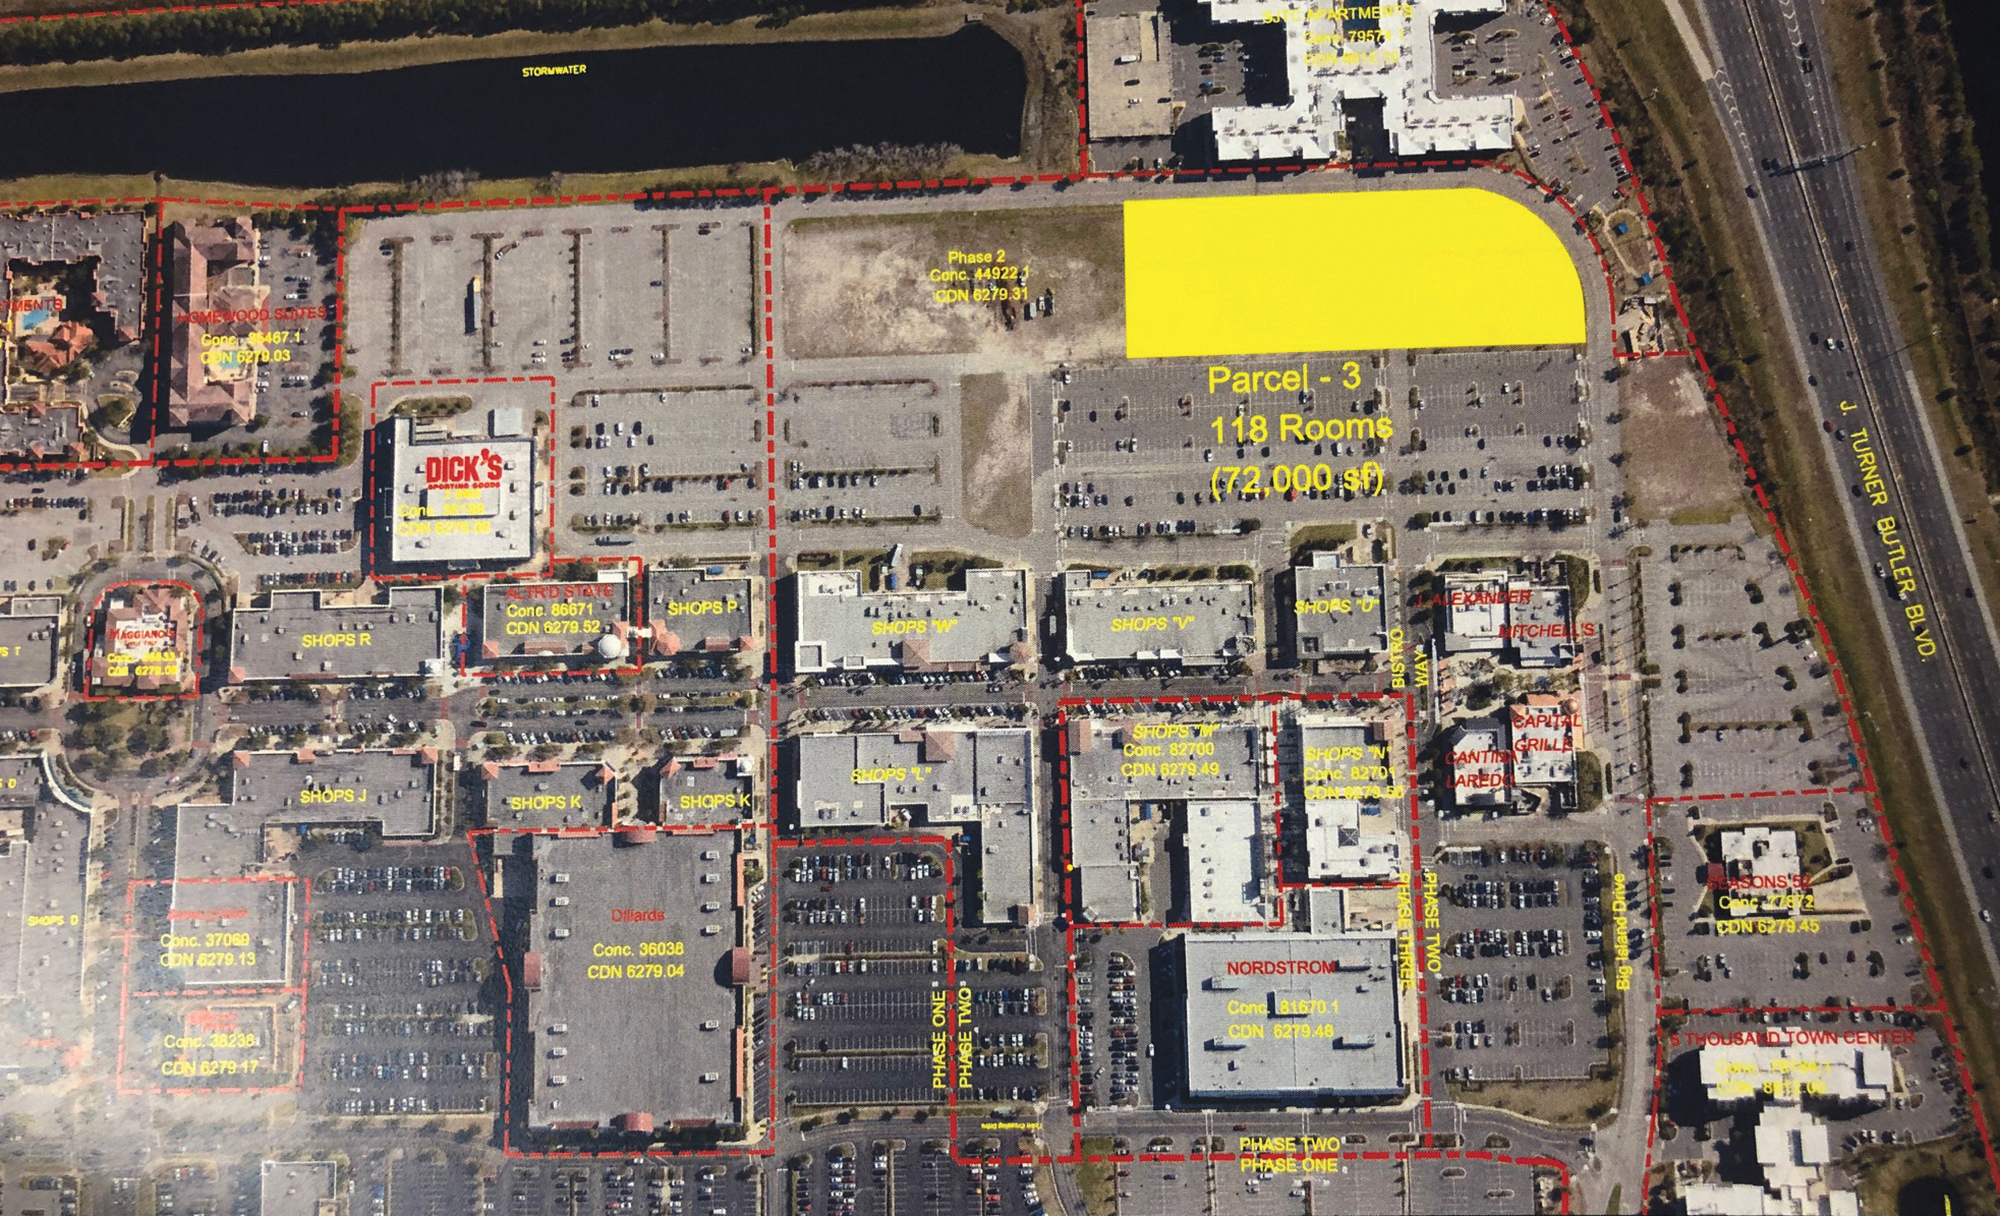 The AC Hotel site, Parcel 3, is along Big Island Drive, east of the southern end of St. Johns Town Center anchored by J. Alexander's and Tesla.